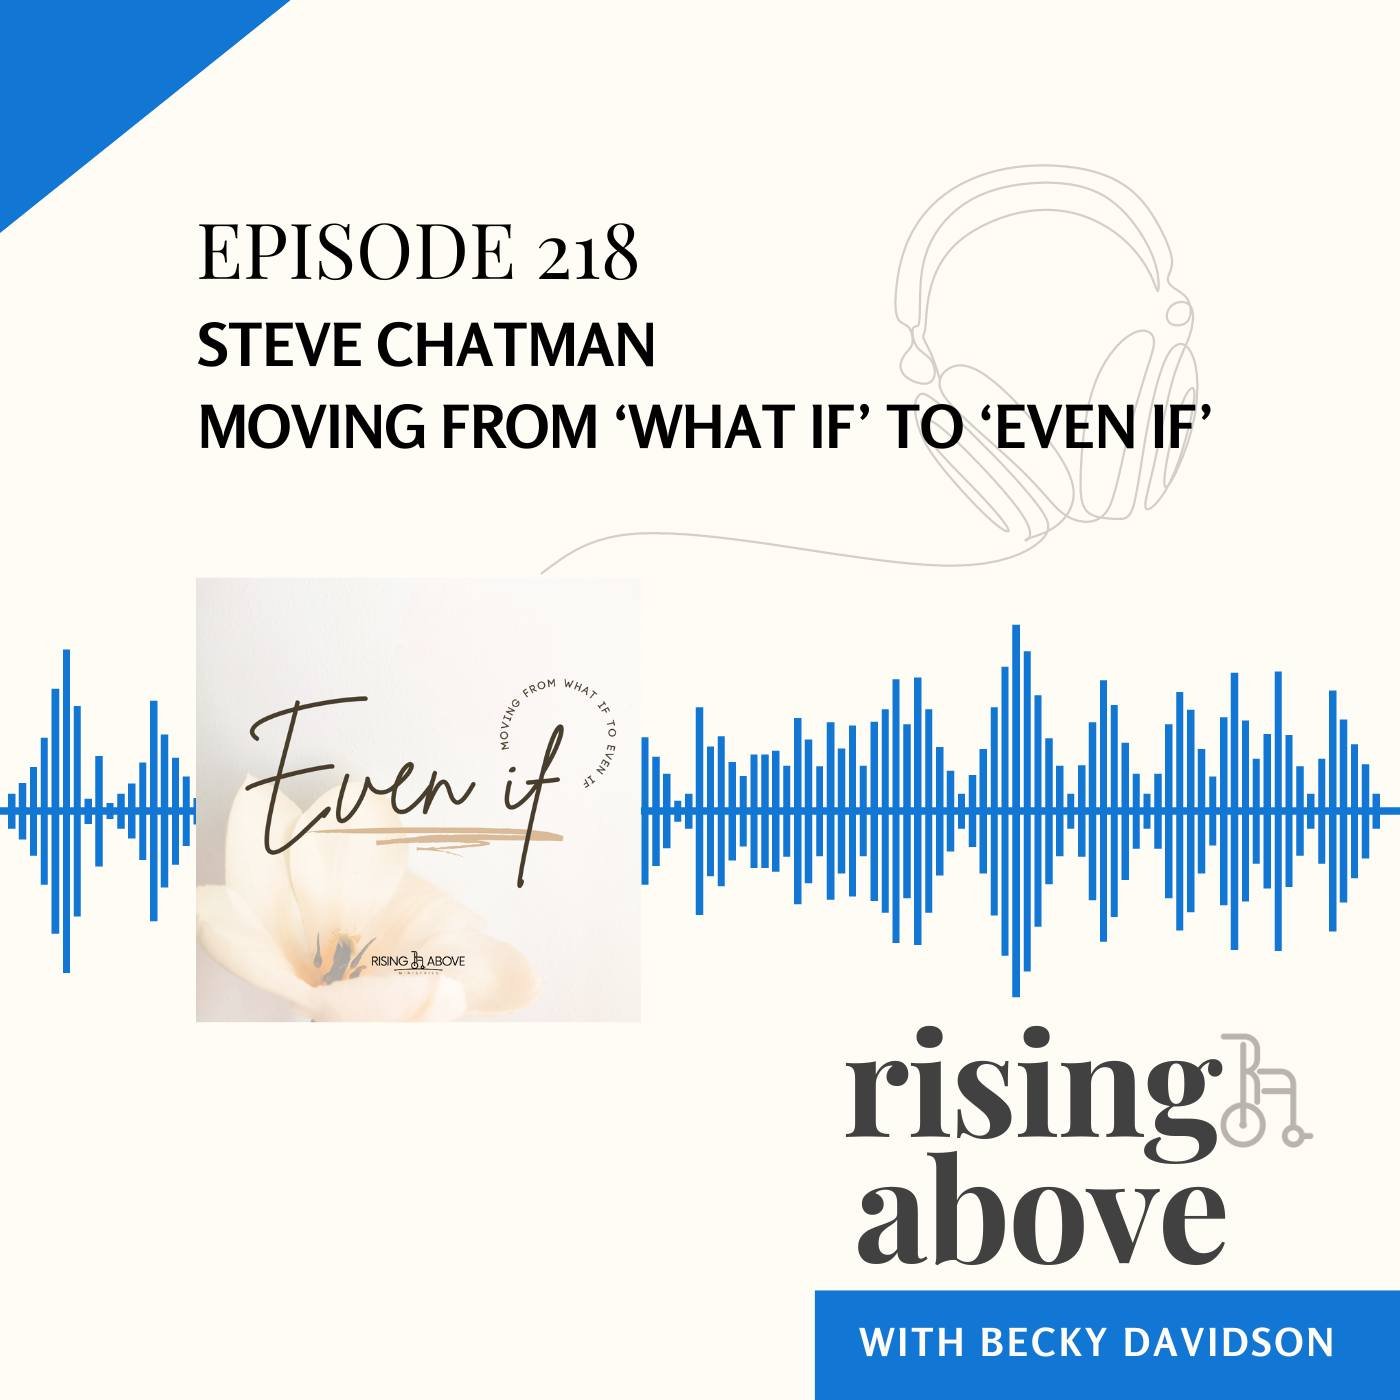 Today, Becky chats with Steve Chatman on our team about how we can move from the 'what if' to 'even if' on our faith journeys. This discussion is based around our Even If study which can be found on our website. Don't miss this one!

Listen wherever 